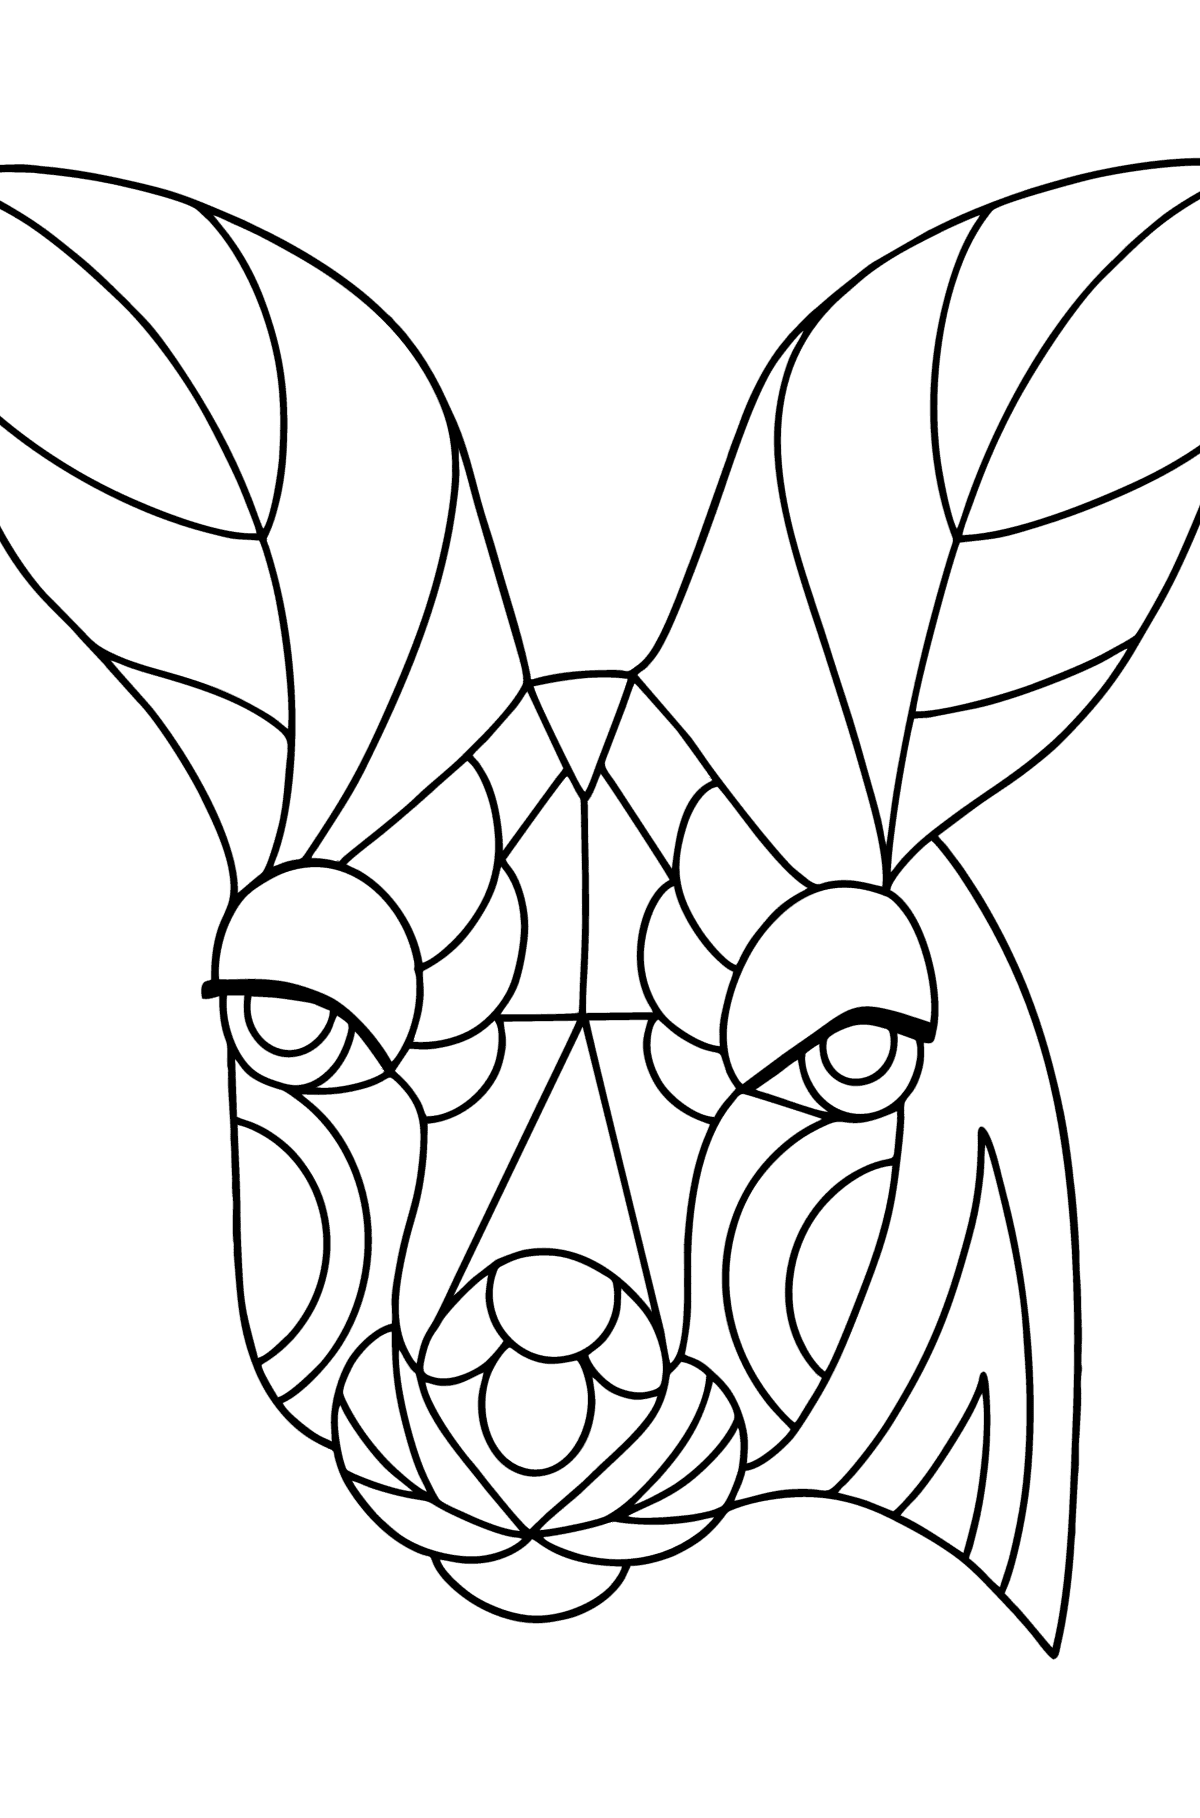 Antistress Kangaroo coloring page - Coloring Pages for Kids